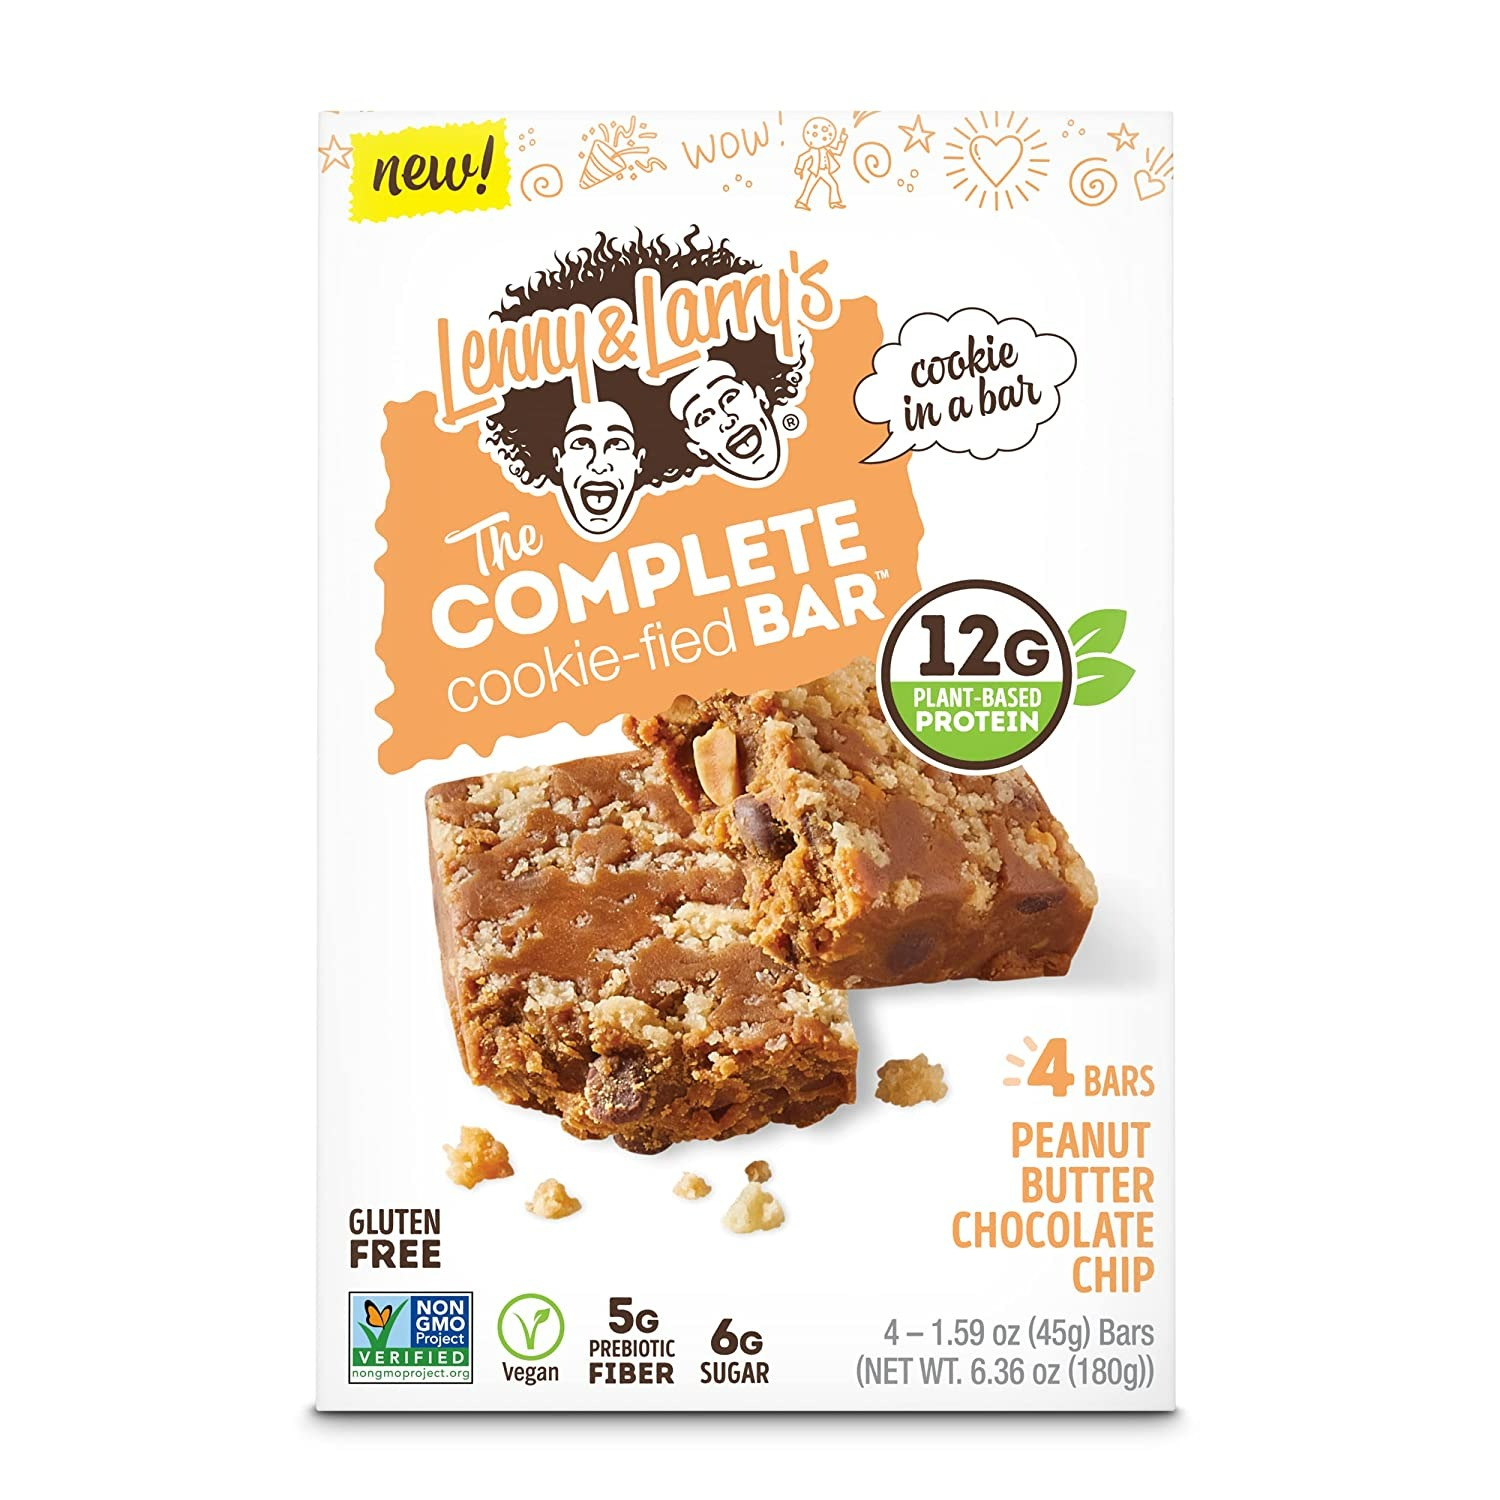 Lenny & Larry's The Complete Cookie-fied Bar - Peanut Butter Chocolate Chip Plant-Based Protein Bar - 9 Adet-2